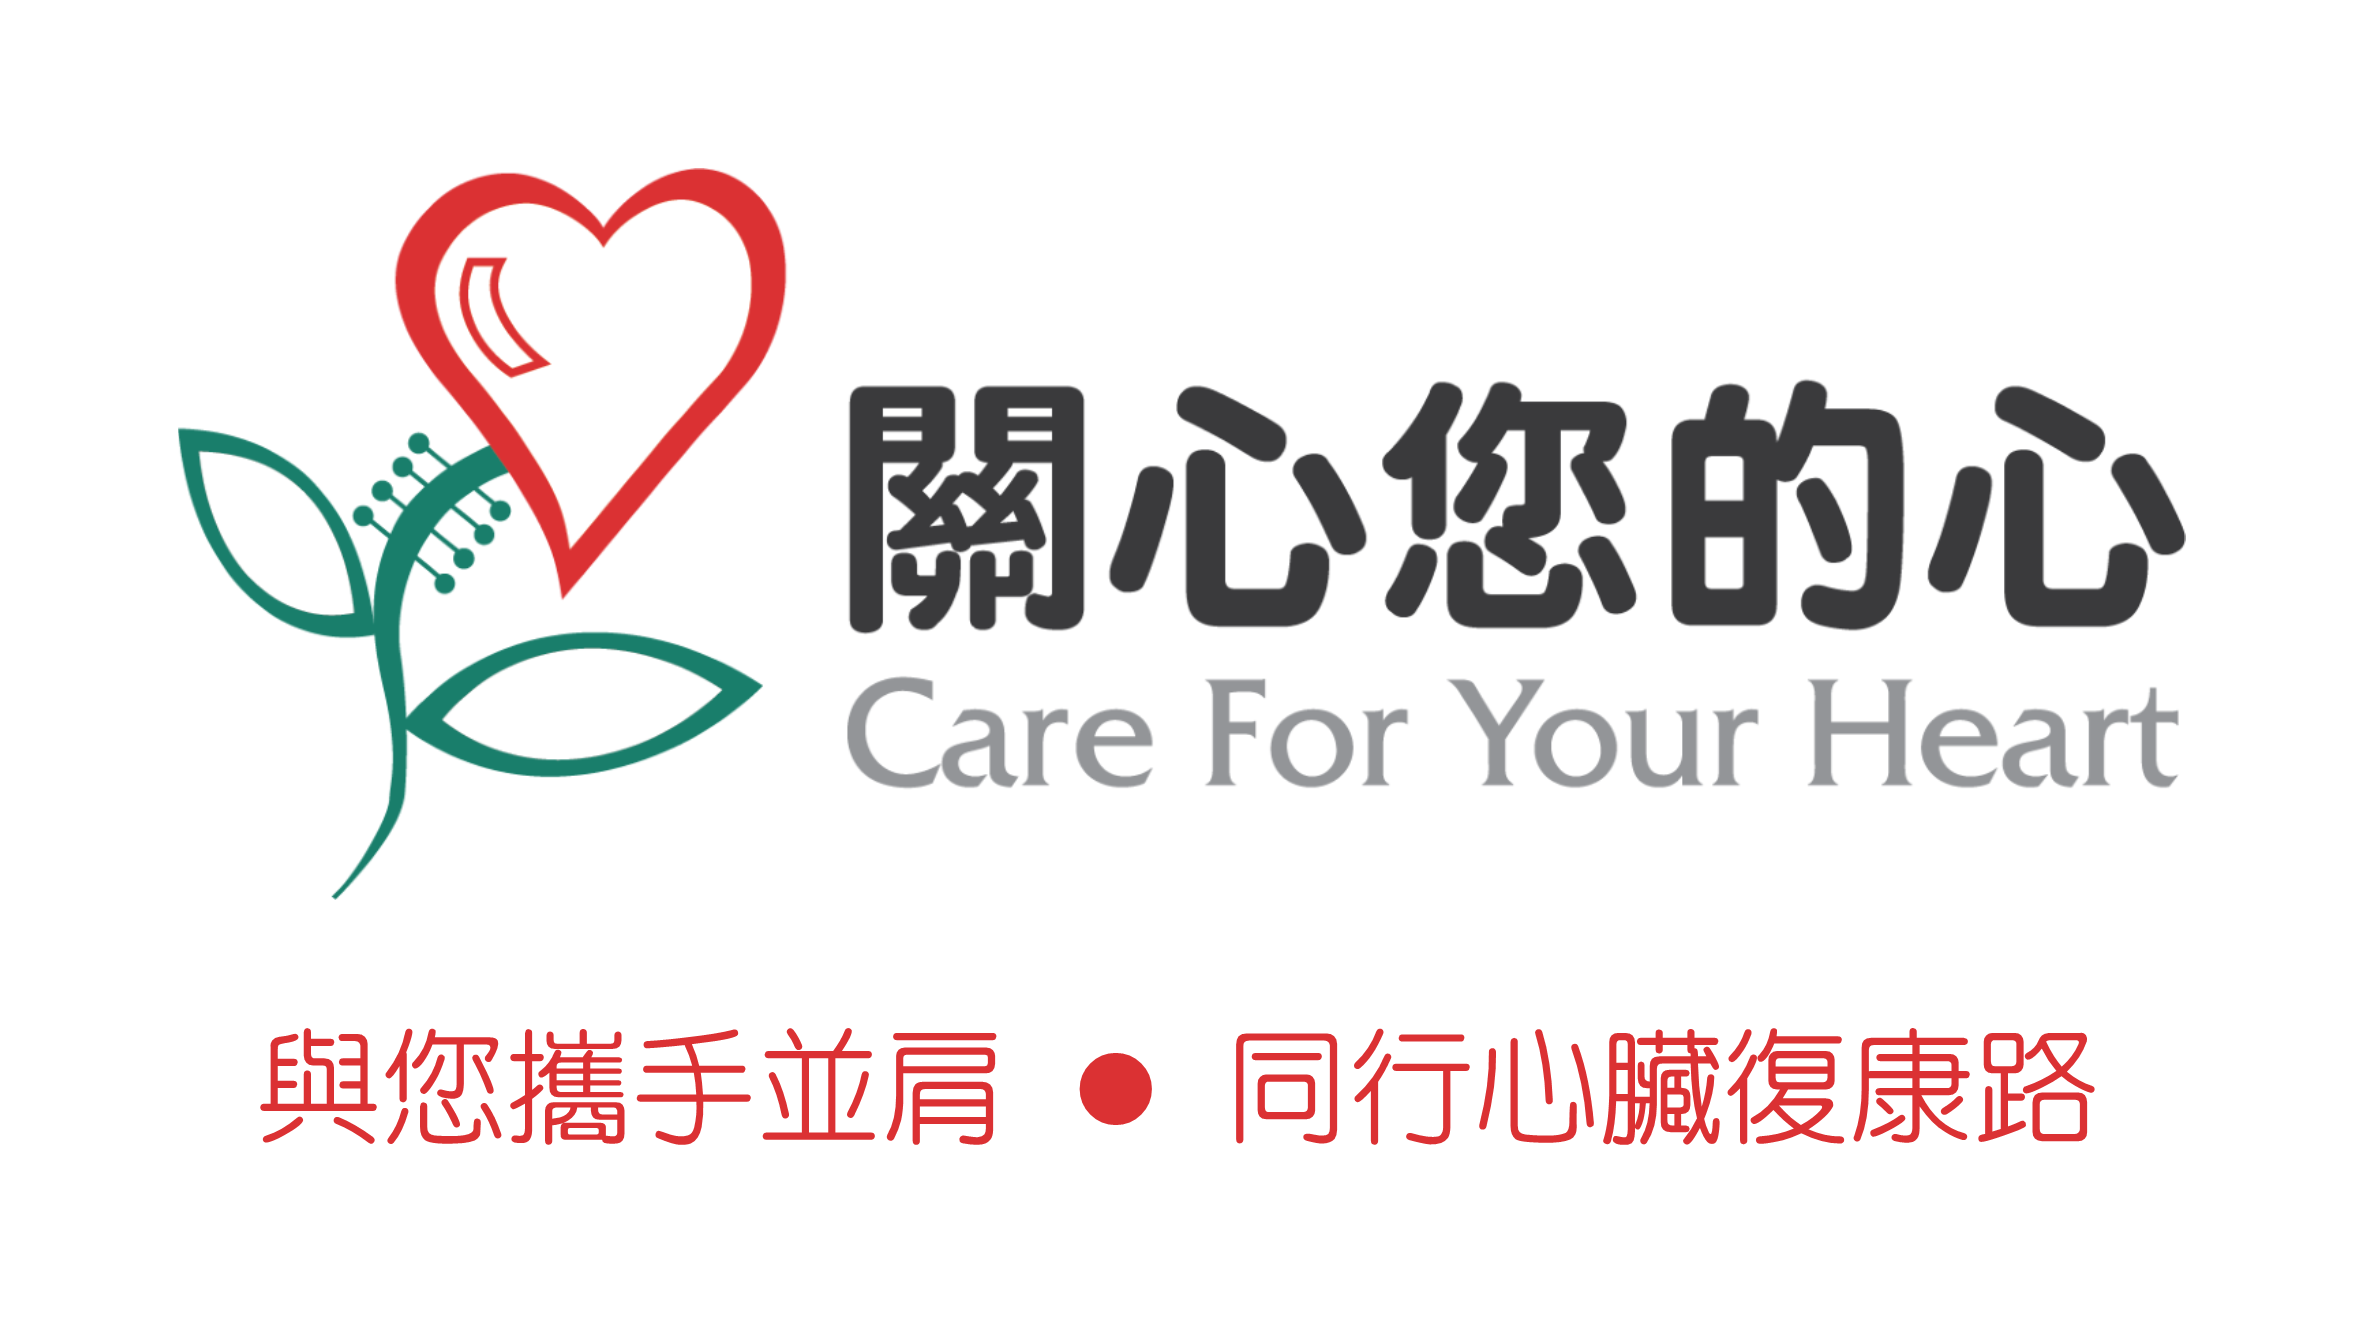 Cardiac Patients Mutual Support and Resource Centre